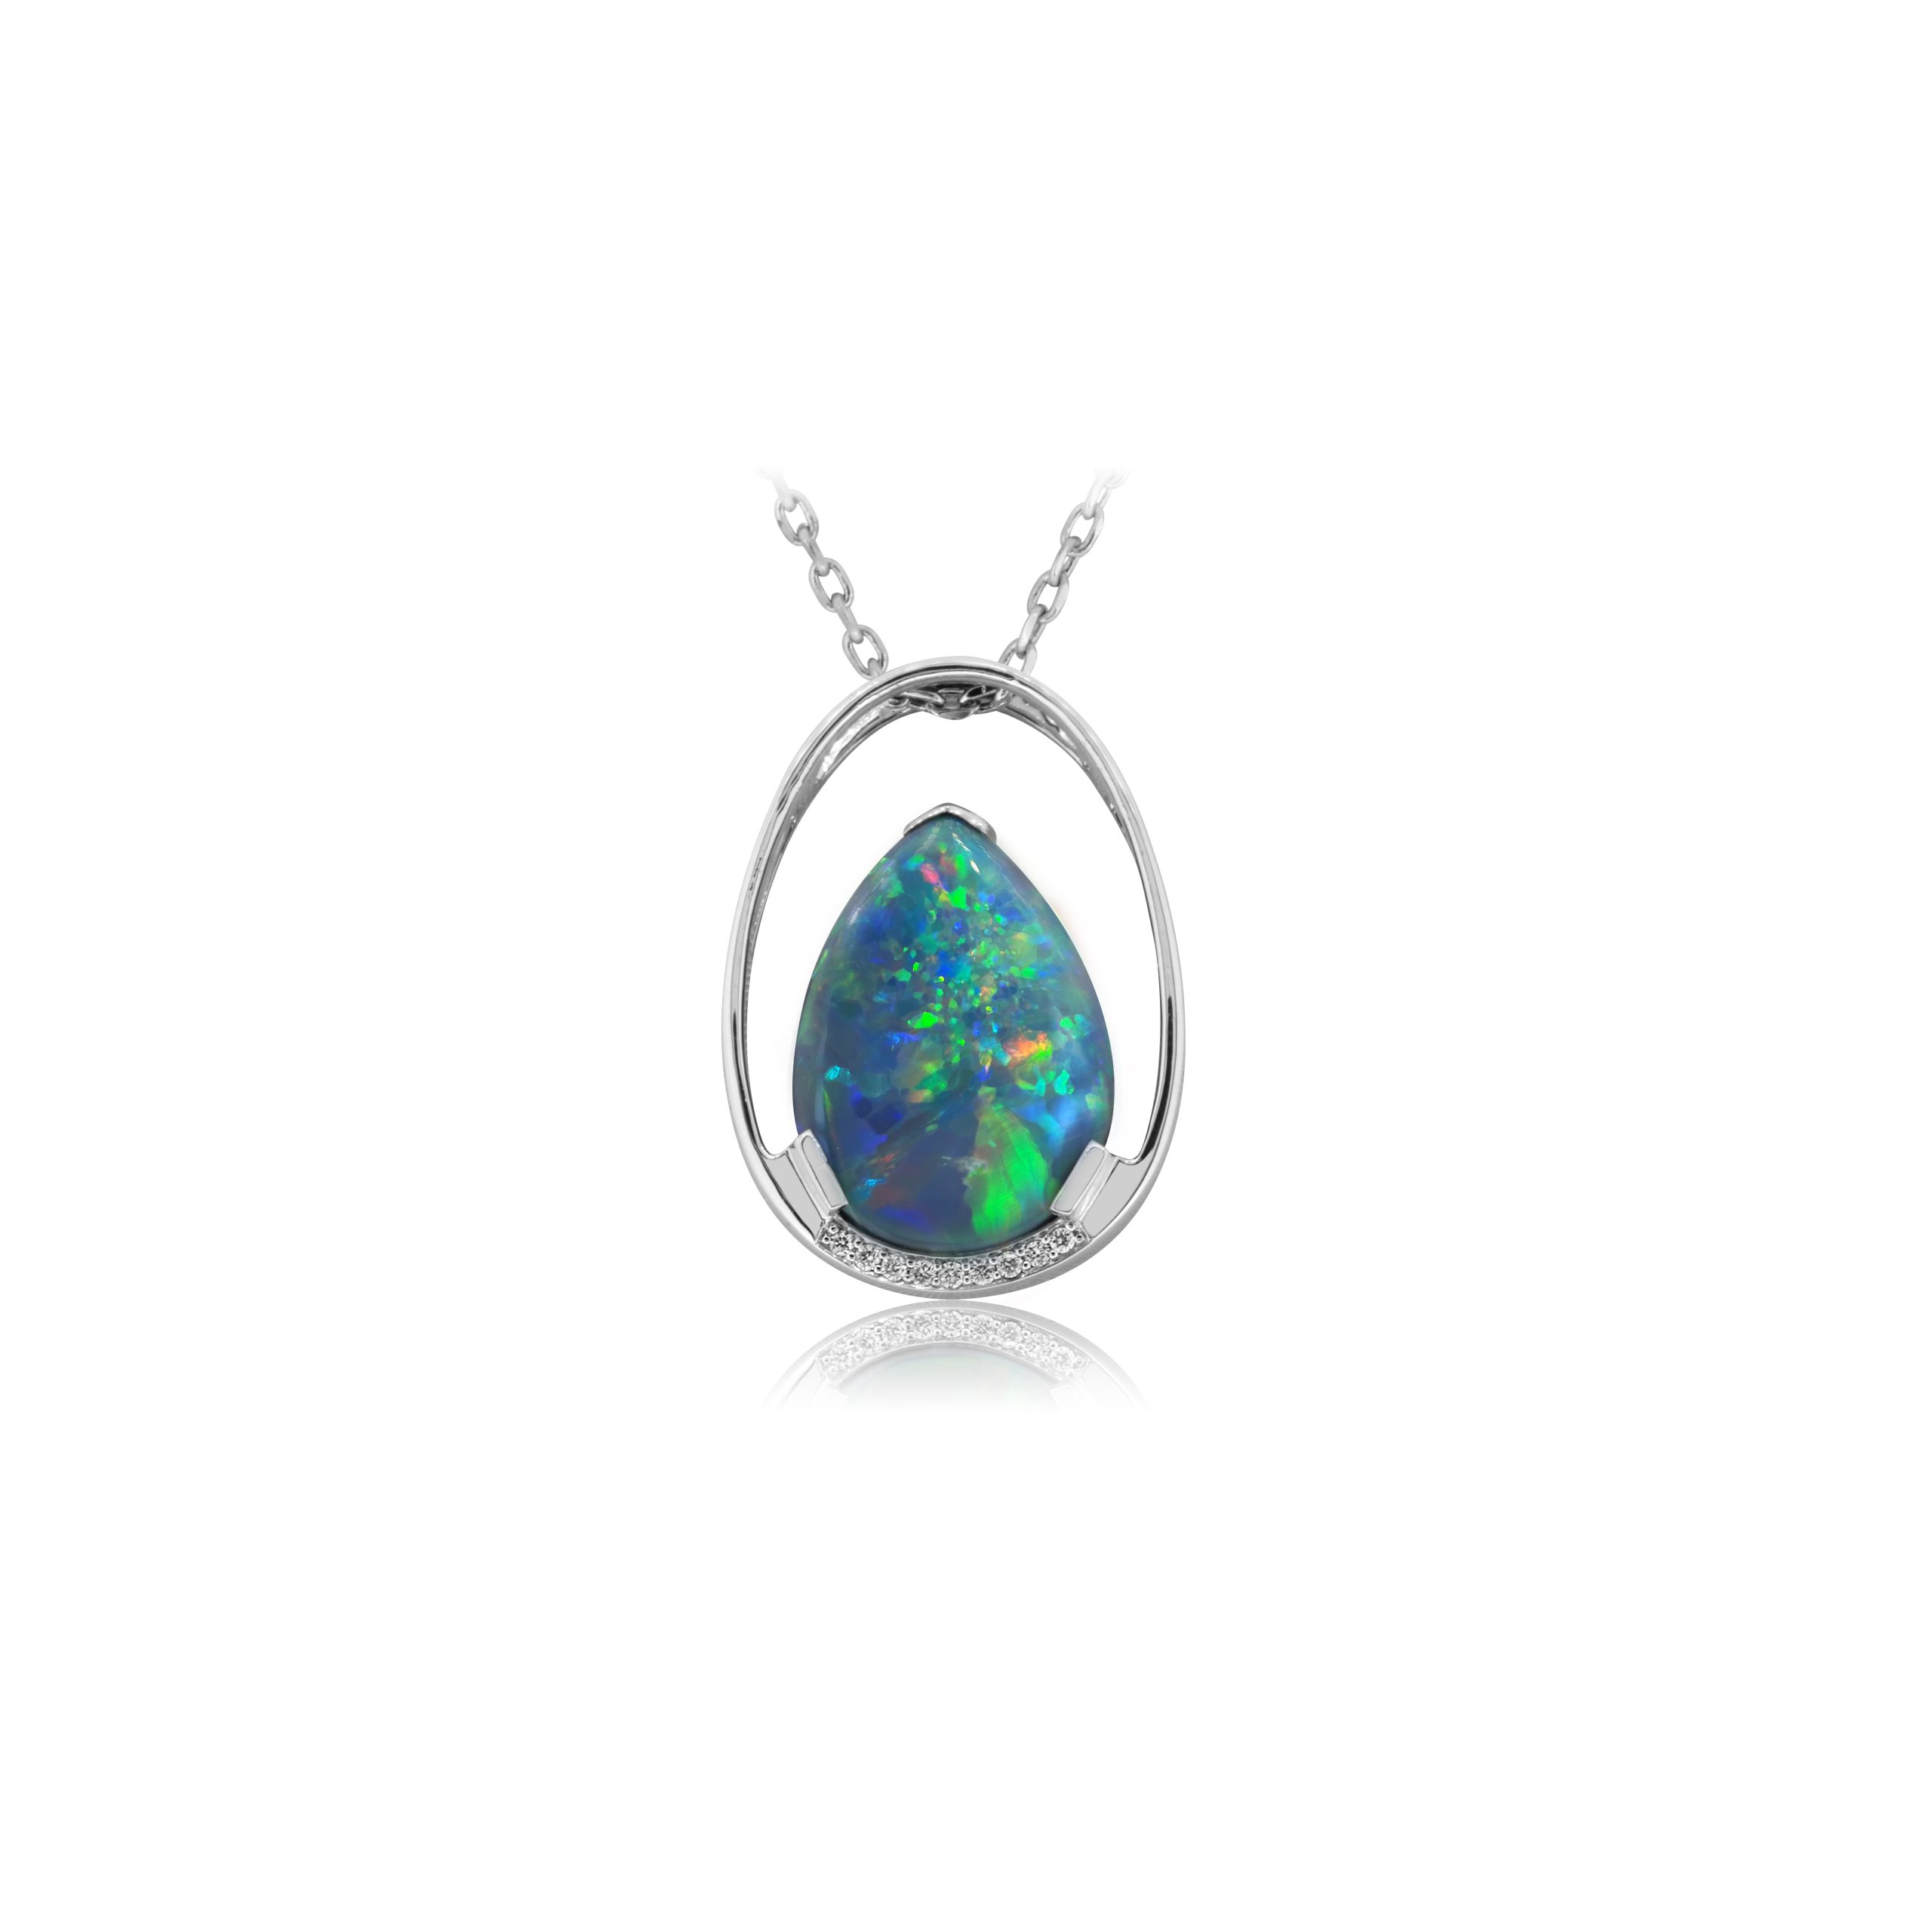 Black Opal Pendant set in 18k White Gold with Diamonds exhibiting ...